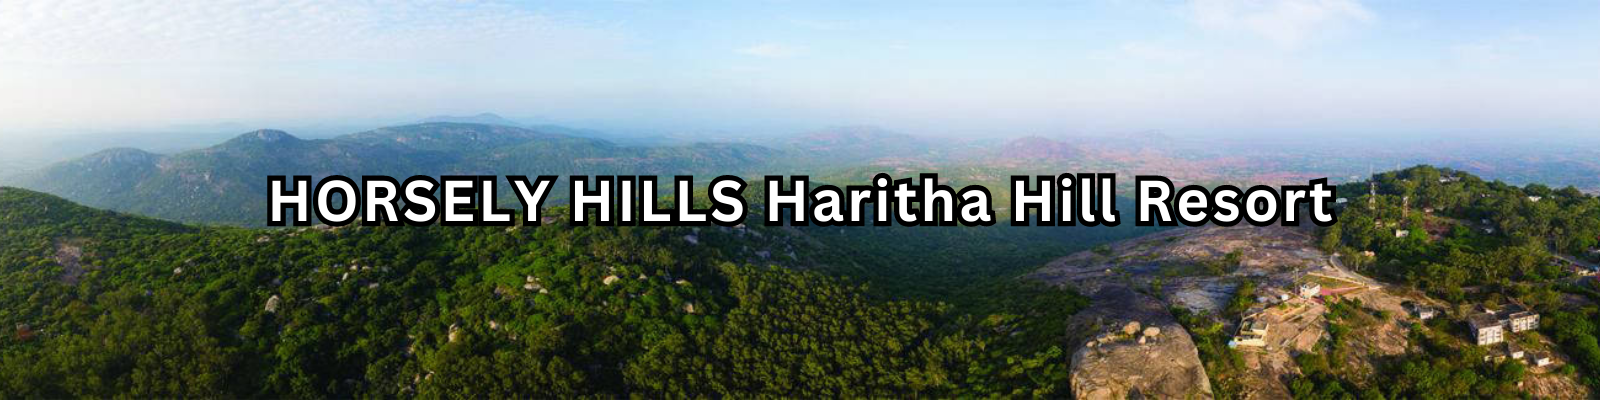 ap tourism hotels in horsley hills